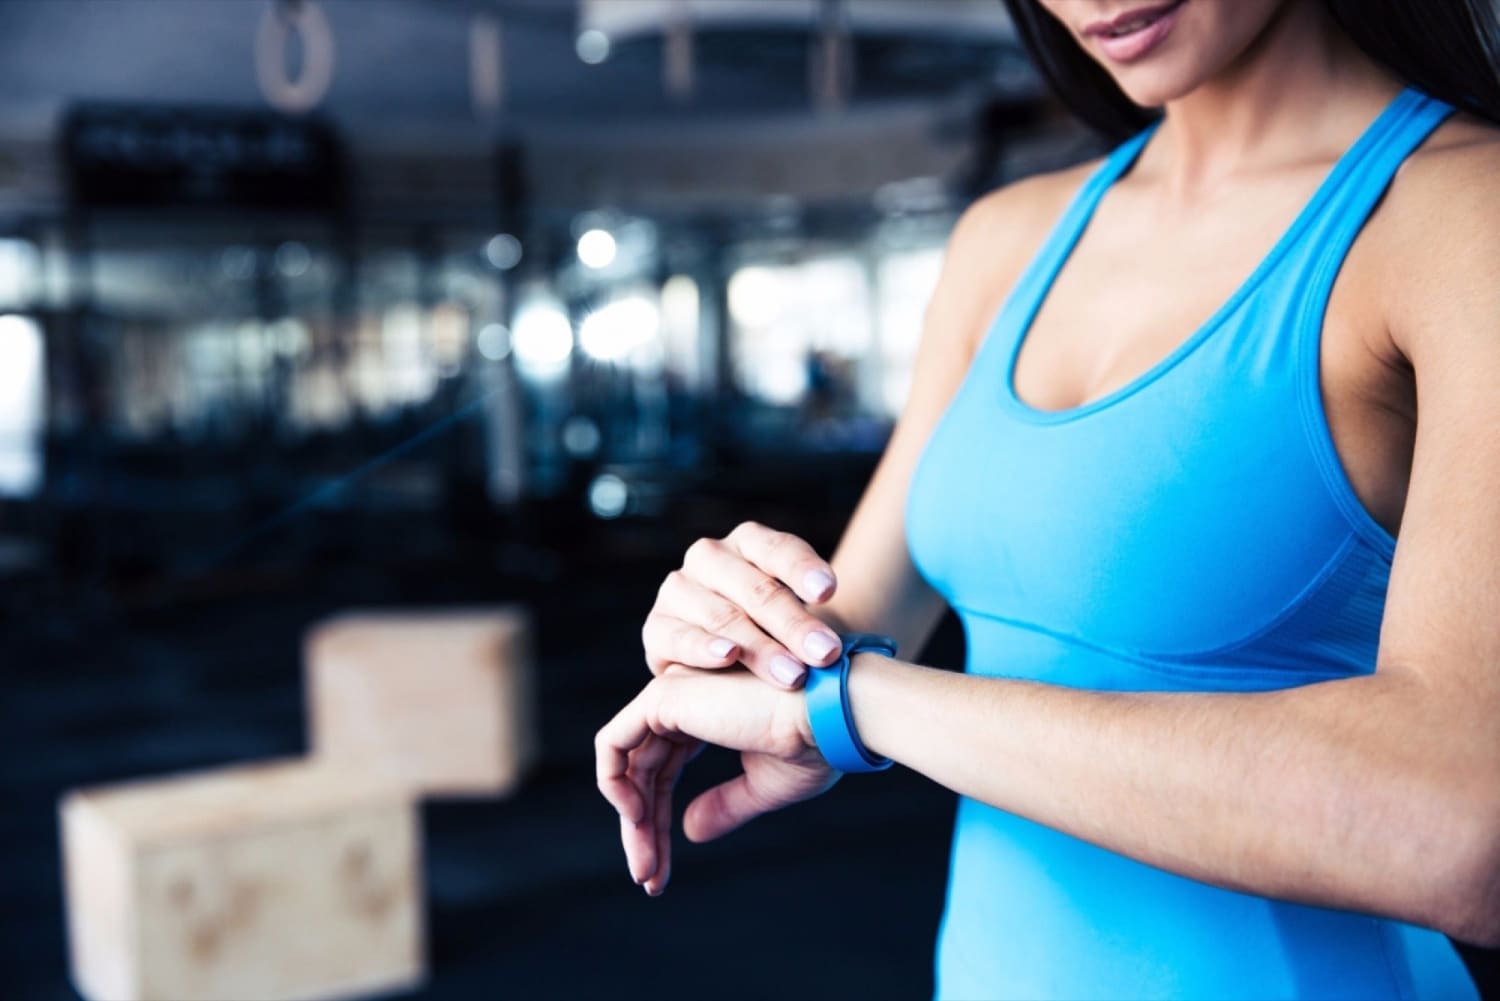 6 Ways Technology Helped Me 'Hack' Getting Into Shape